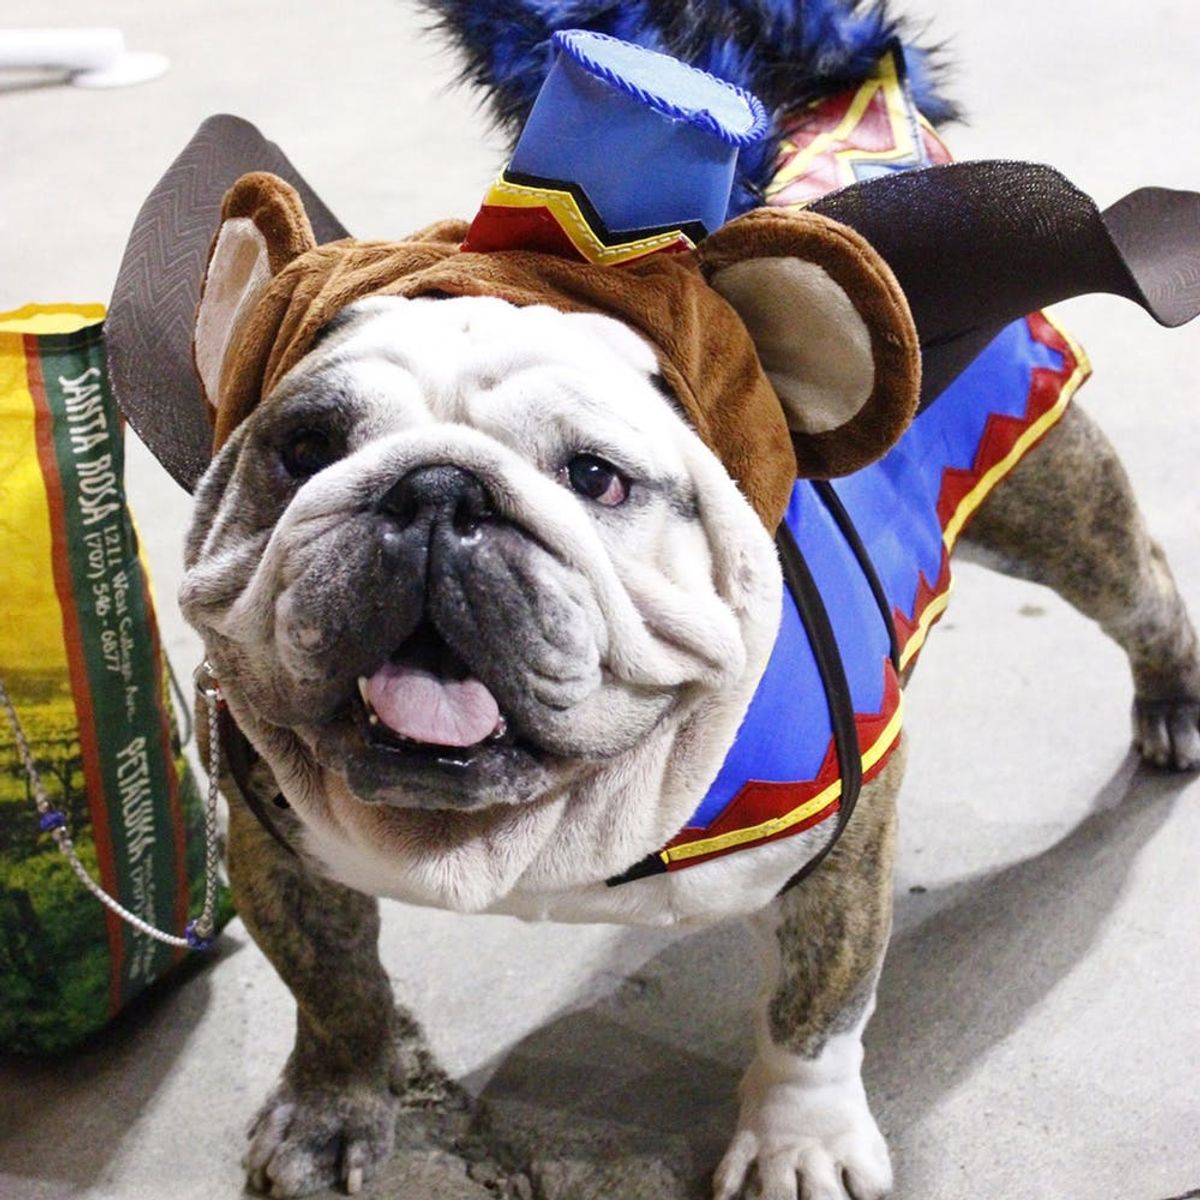 The 9 Cutest Dog Costumes We Spotted at the San Francisco Dog Show